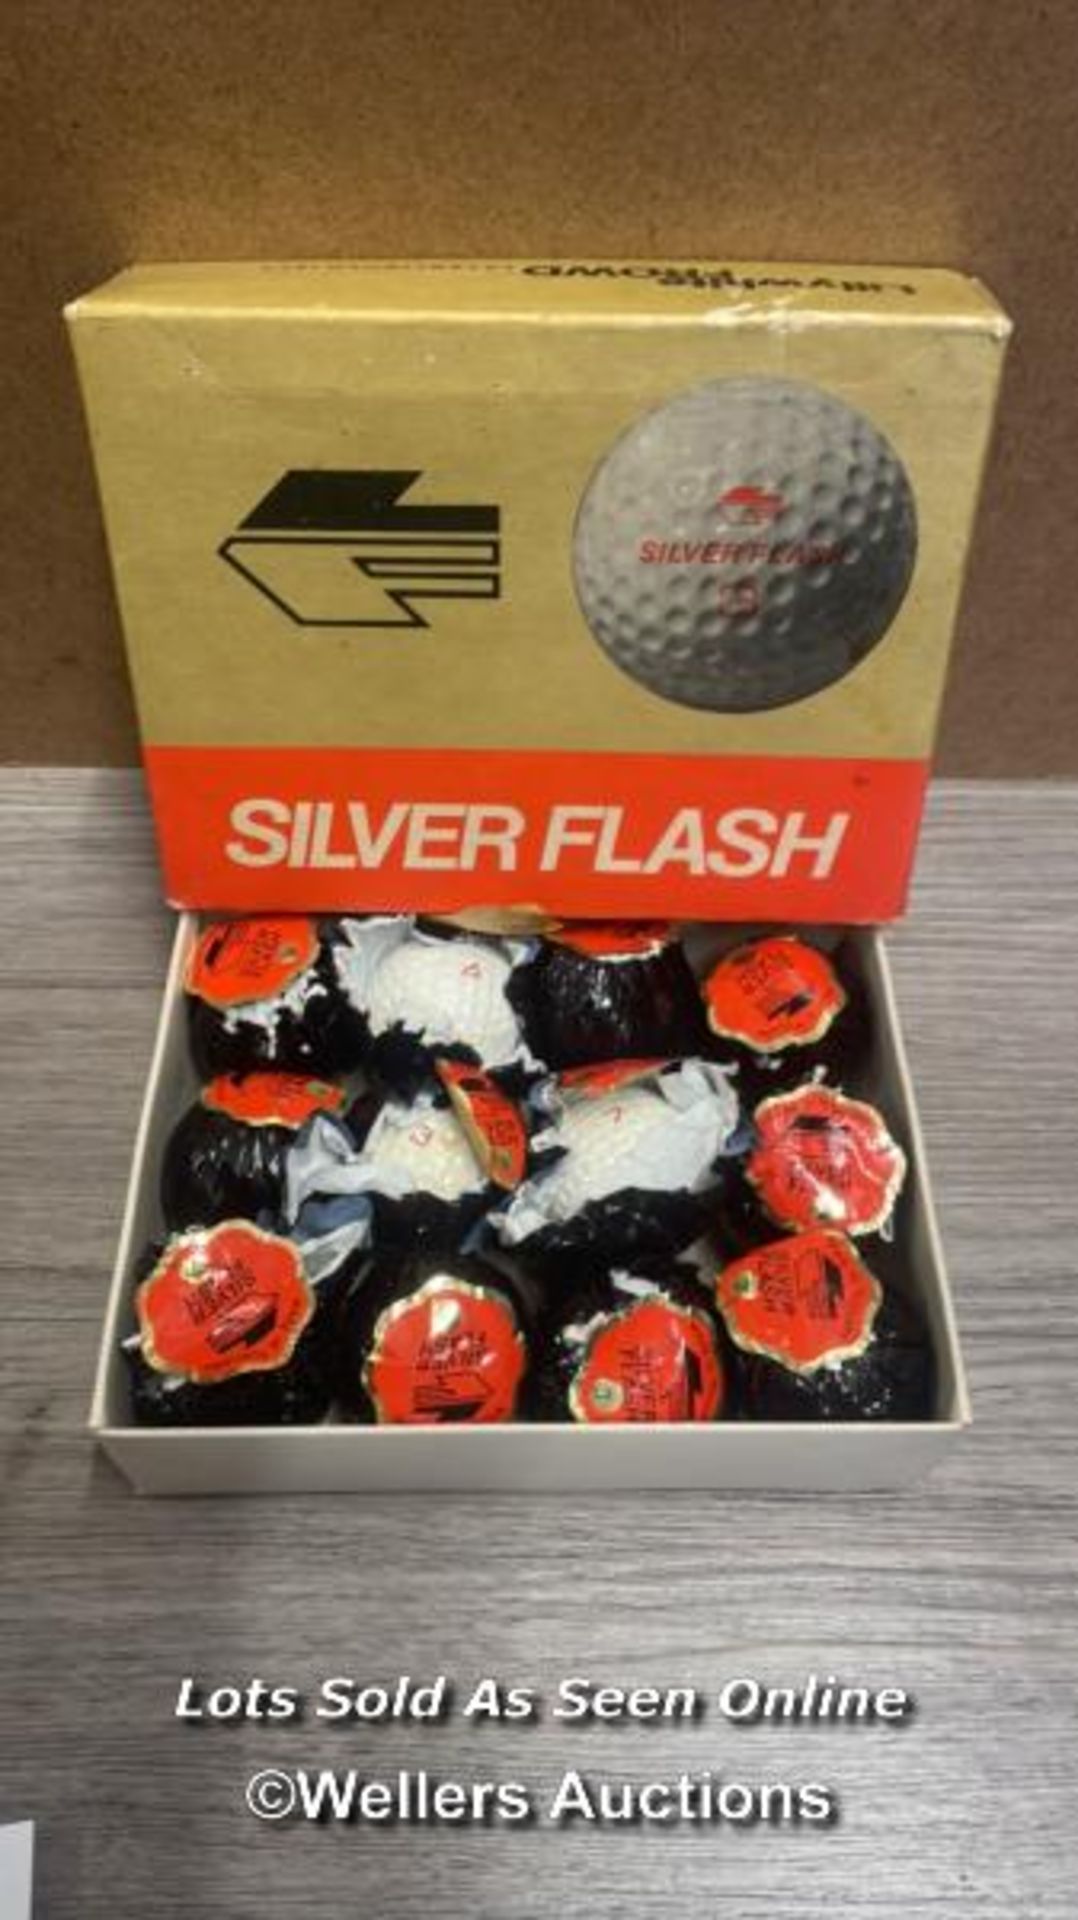 SILVER FLASH GOLF BALLS, BOX OF 12 SOME WITH VERY MINOR USE